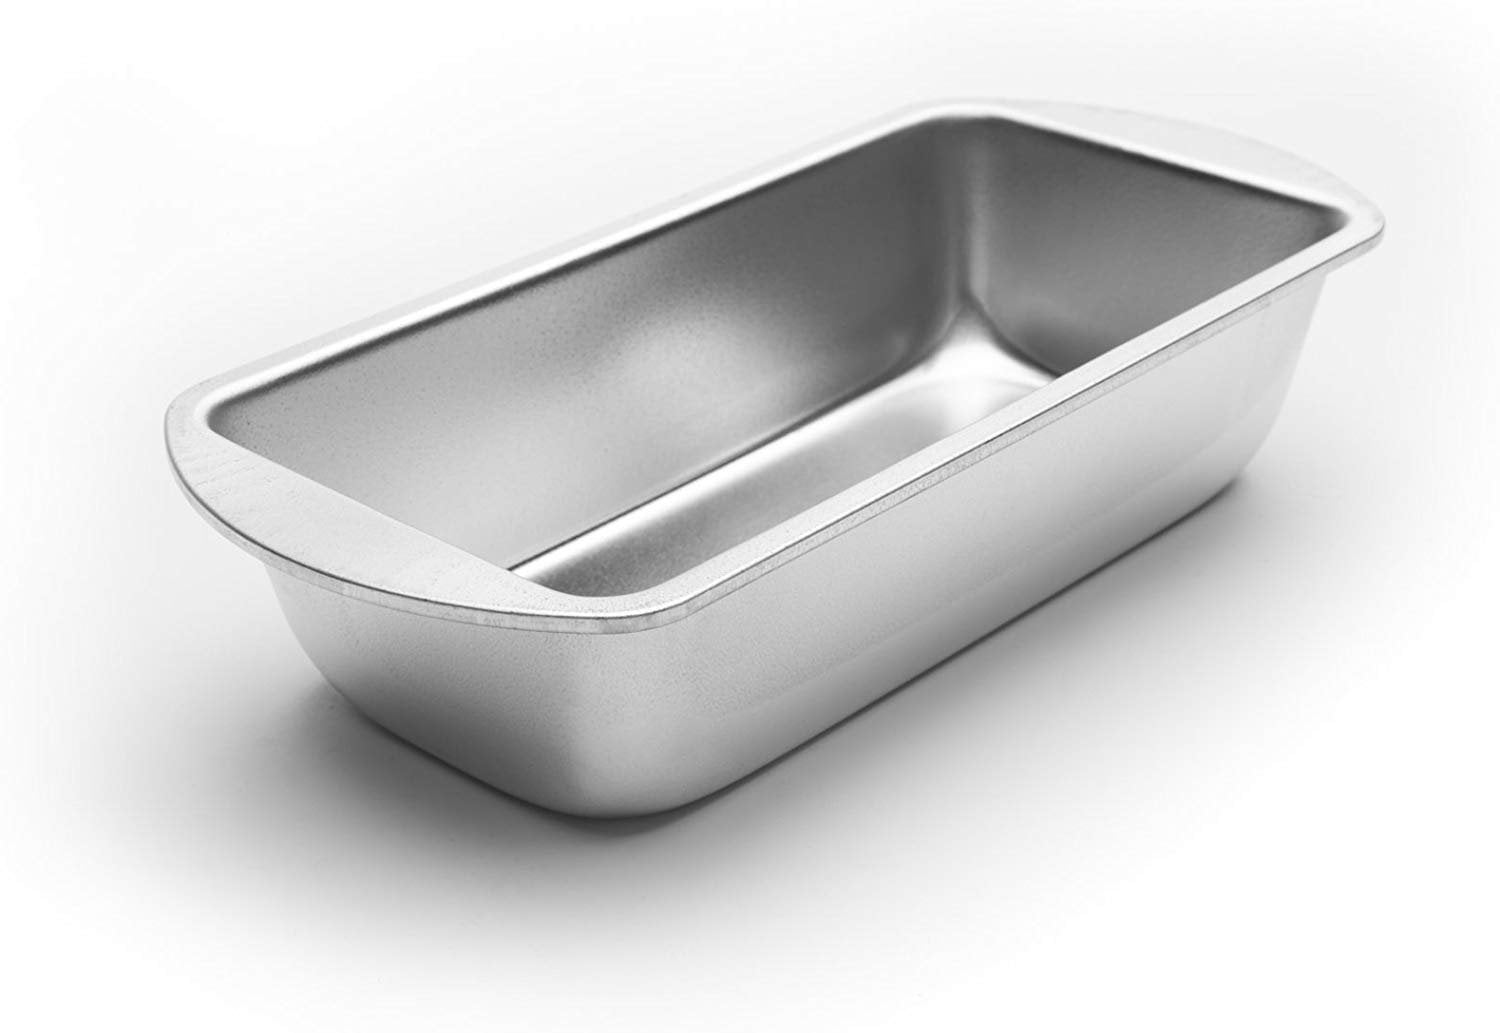 Check This Out! My Favorite New Bread Pan